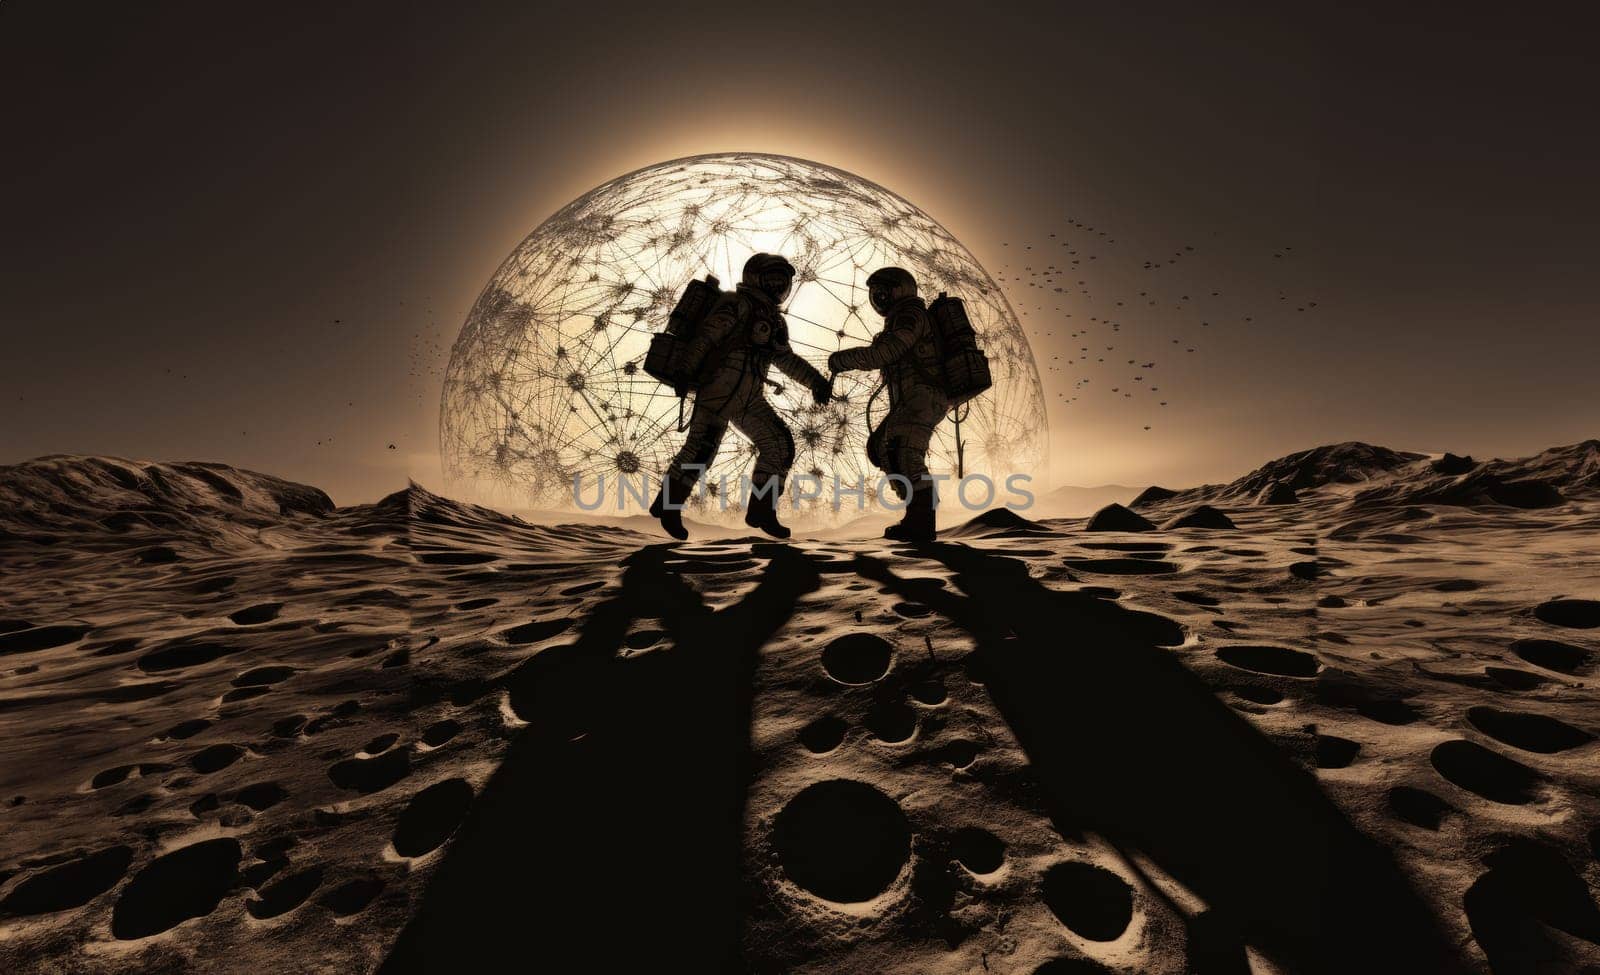 Two astronauts bravely venture into the shadowy realms of the lunar surface, bathed in the ethereal glow of space, as they embark on an exploration of the mysterious and uncharted territories of the moon.